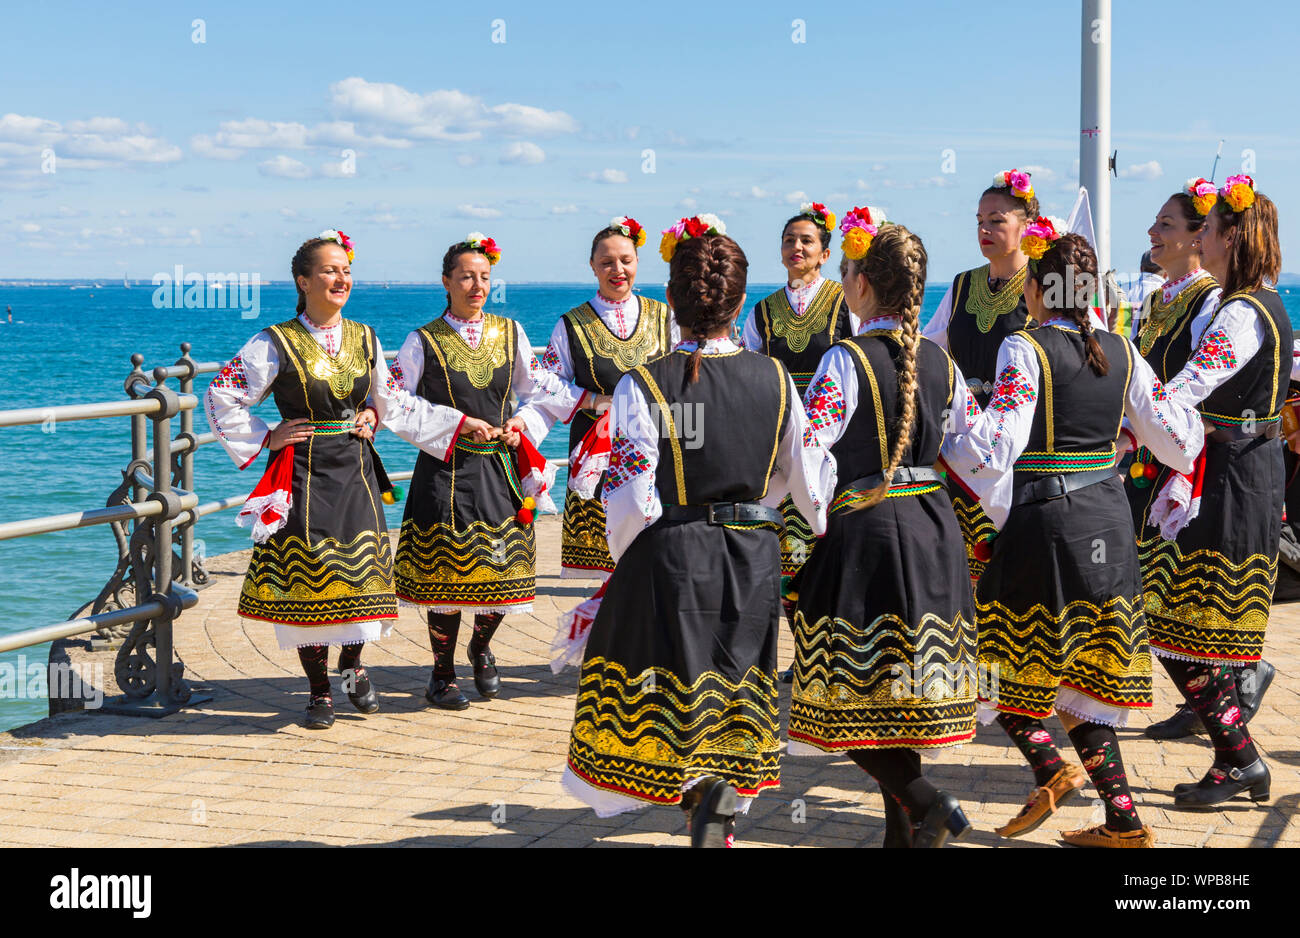 Swanage, Dorset UK. 8th September 2019. Crowds flock to the seaside town of Swanage to enjoy the dancing, with over 50 dance teams including morris dancing for Swanage Folk Festival on a warm sunny day. Zlaten Klas thrill the crowds with their traditional Bulgarian dances. Credit: Carolyn Jenkins/Alamy Live News Stock Photo